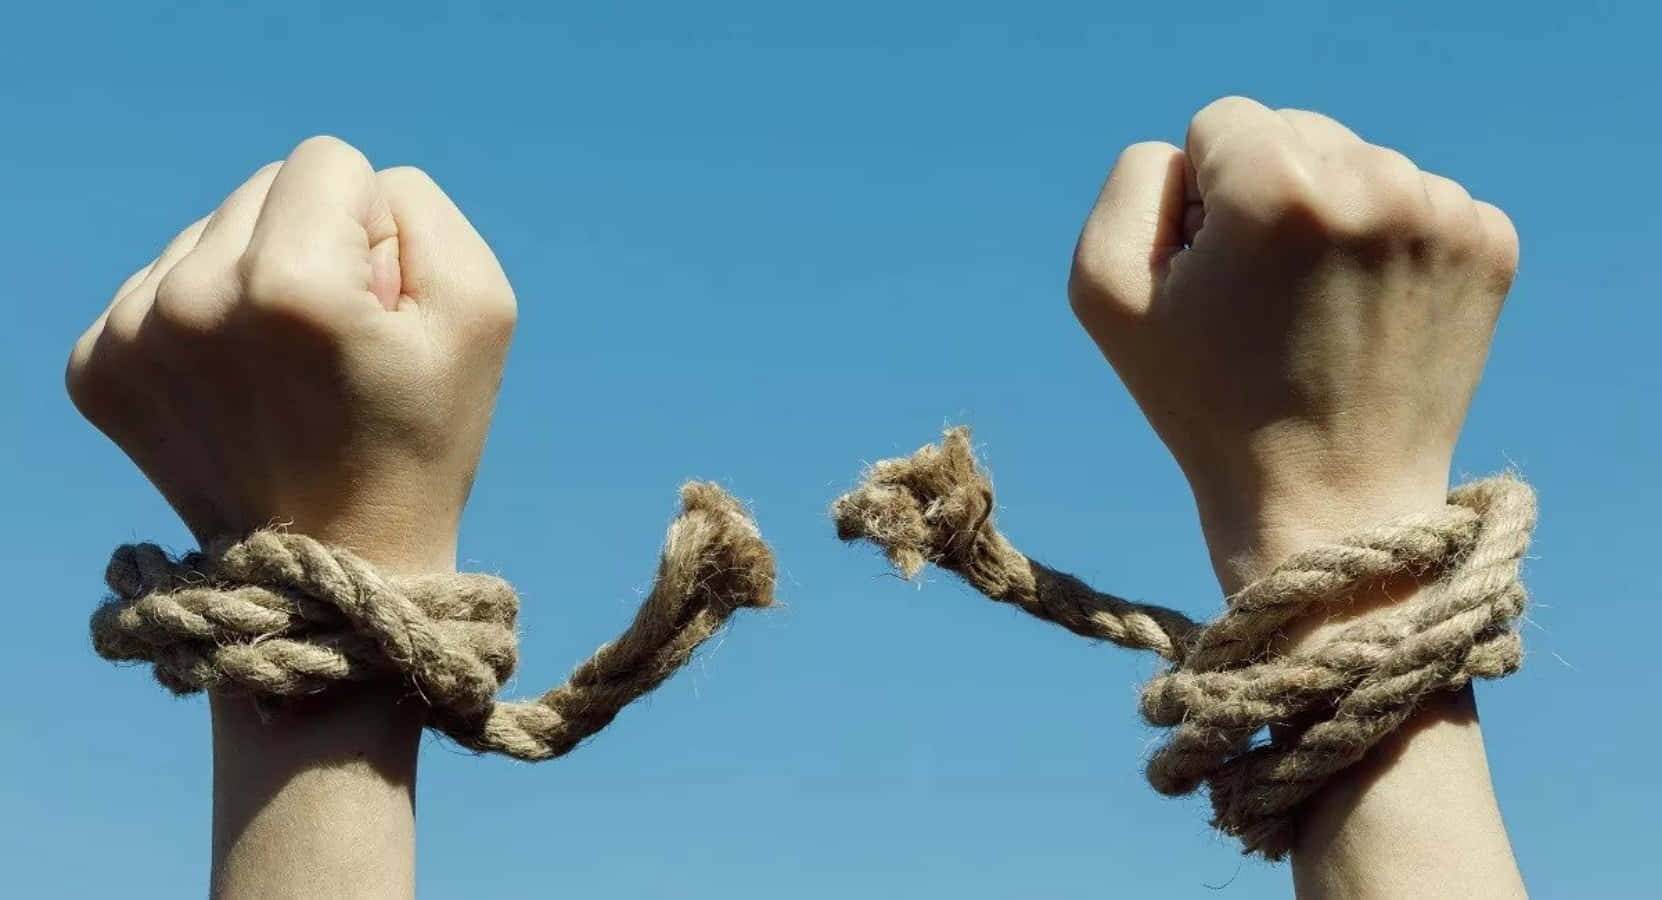 Two Hands Tied Up With Rope